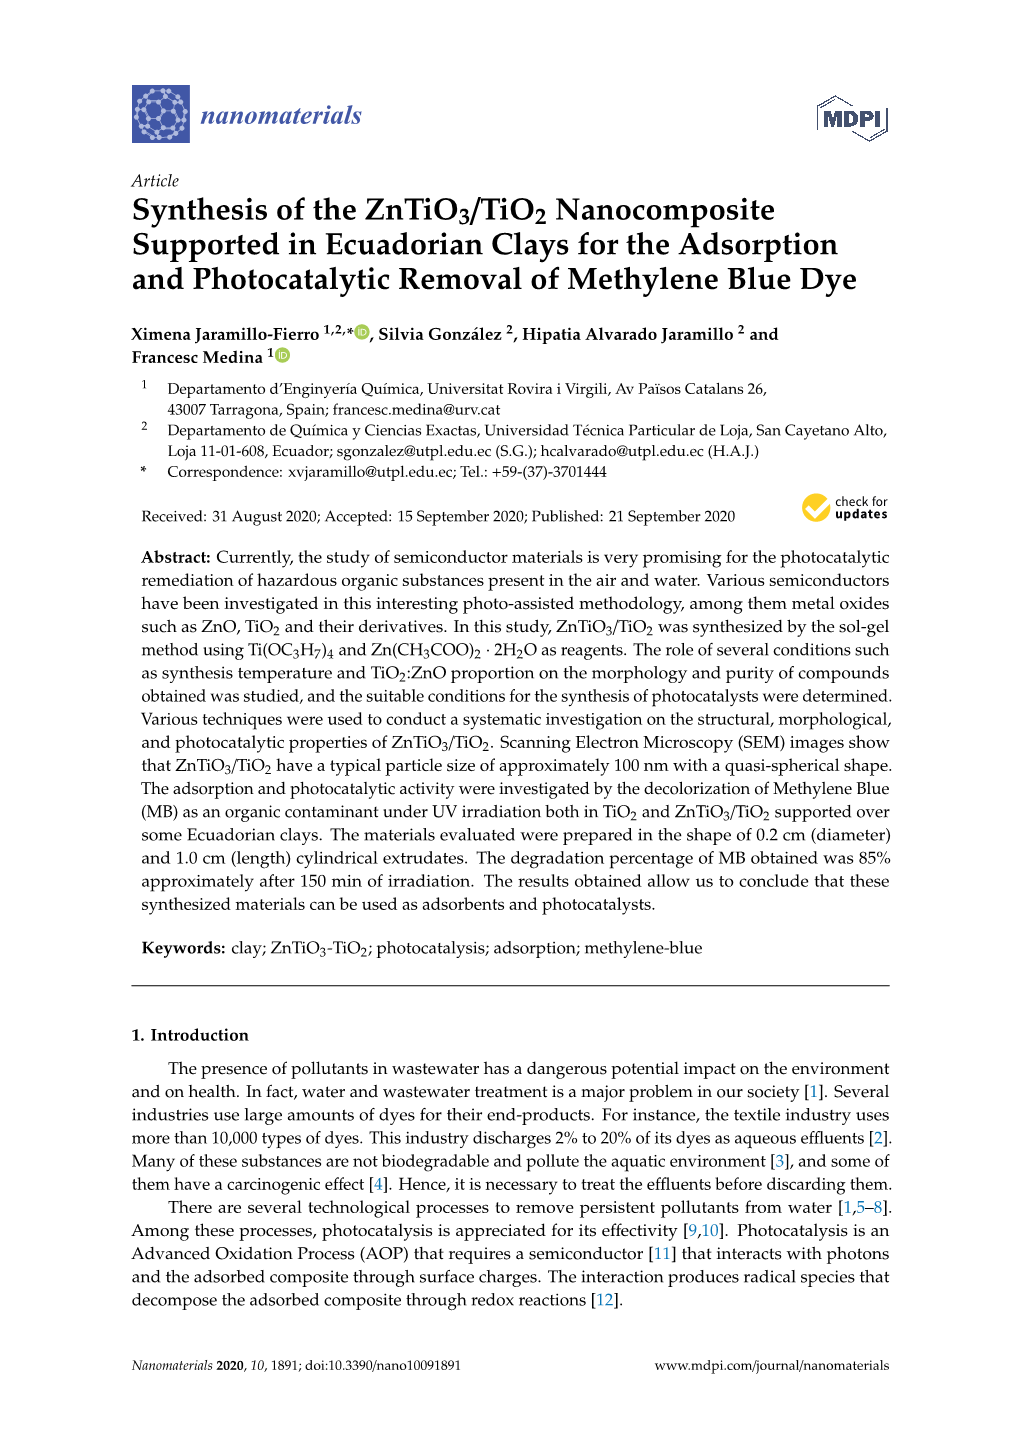 Synthesis of the Zntio3/Tio2 Nanocomposite Supported in Ecuadorian Clays for the Adsorption and Photocatalytic Removal of Methylene Blue Dye